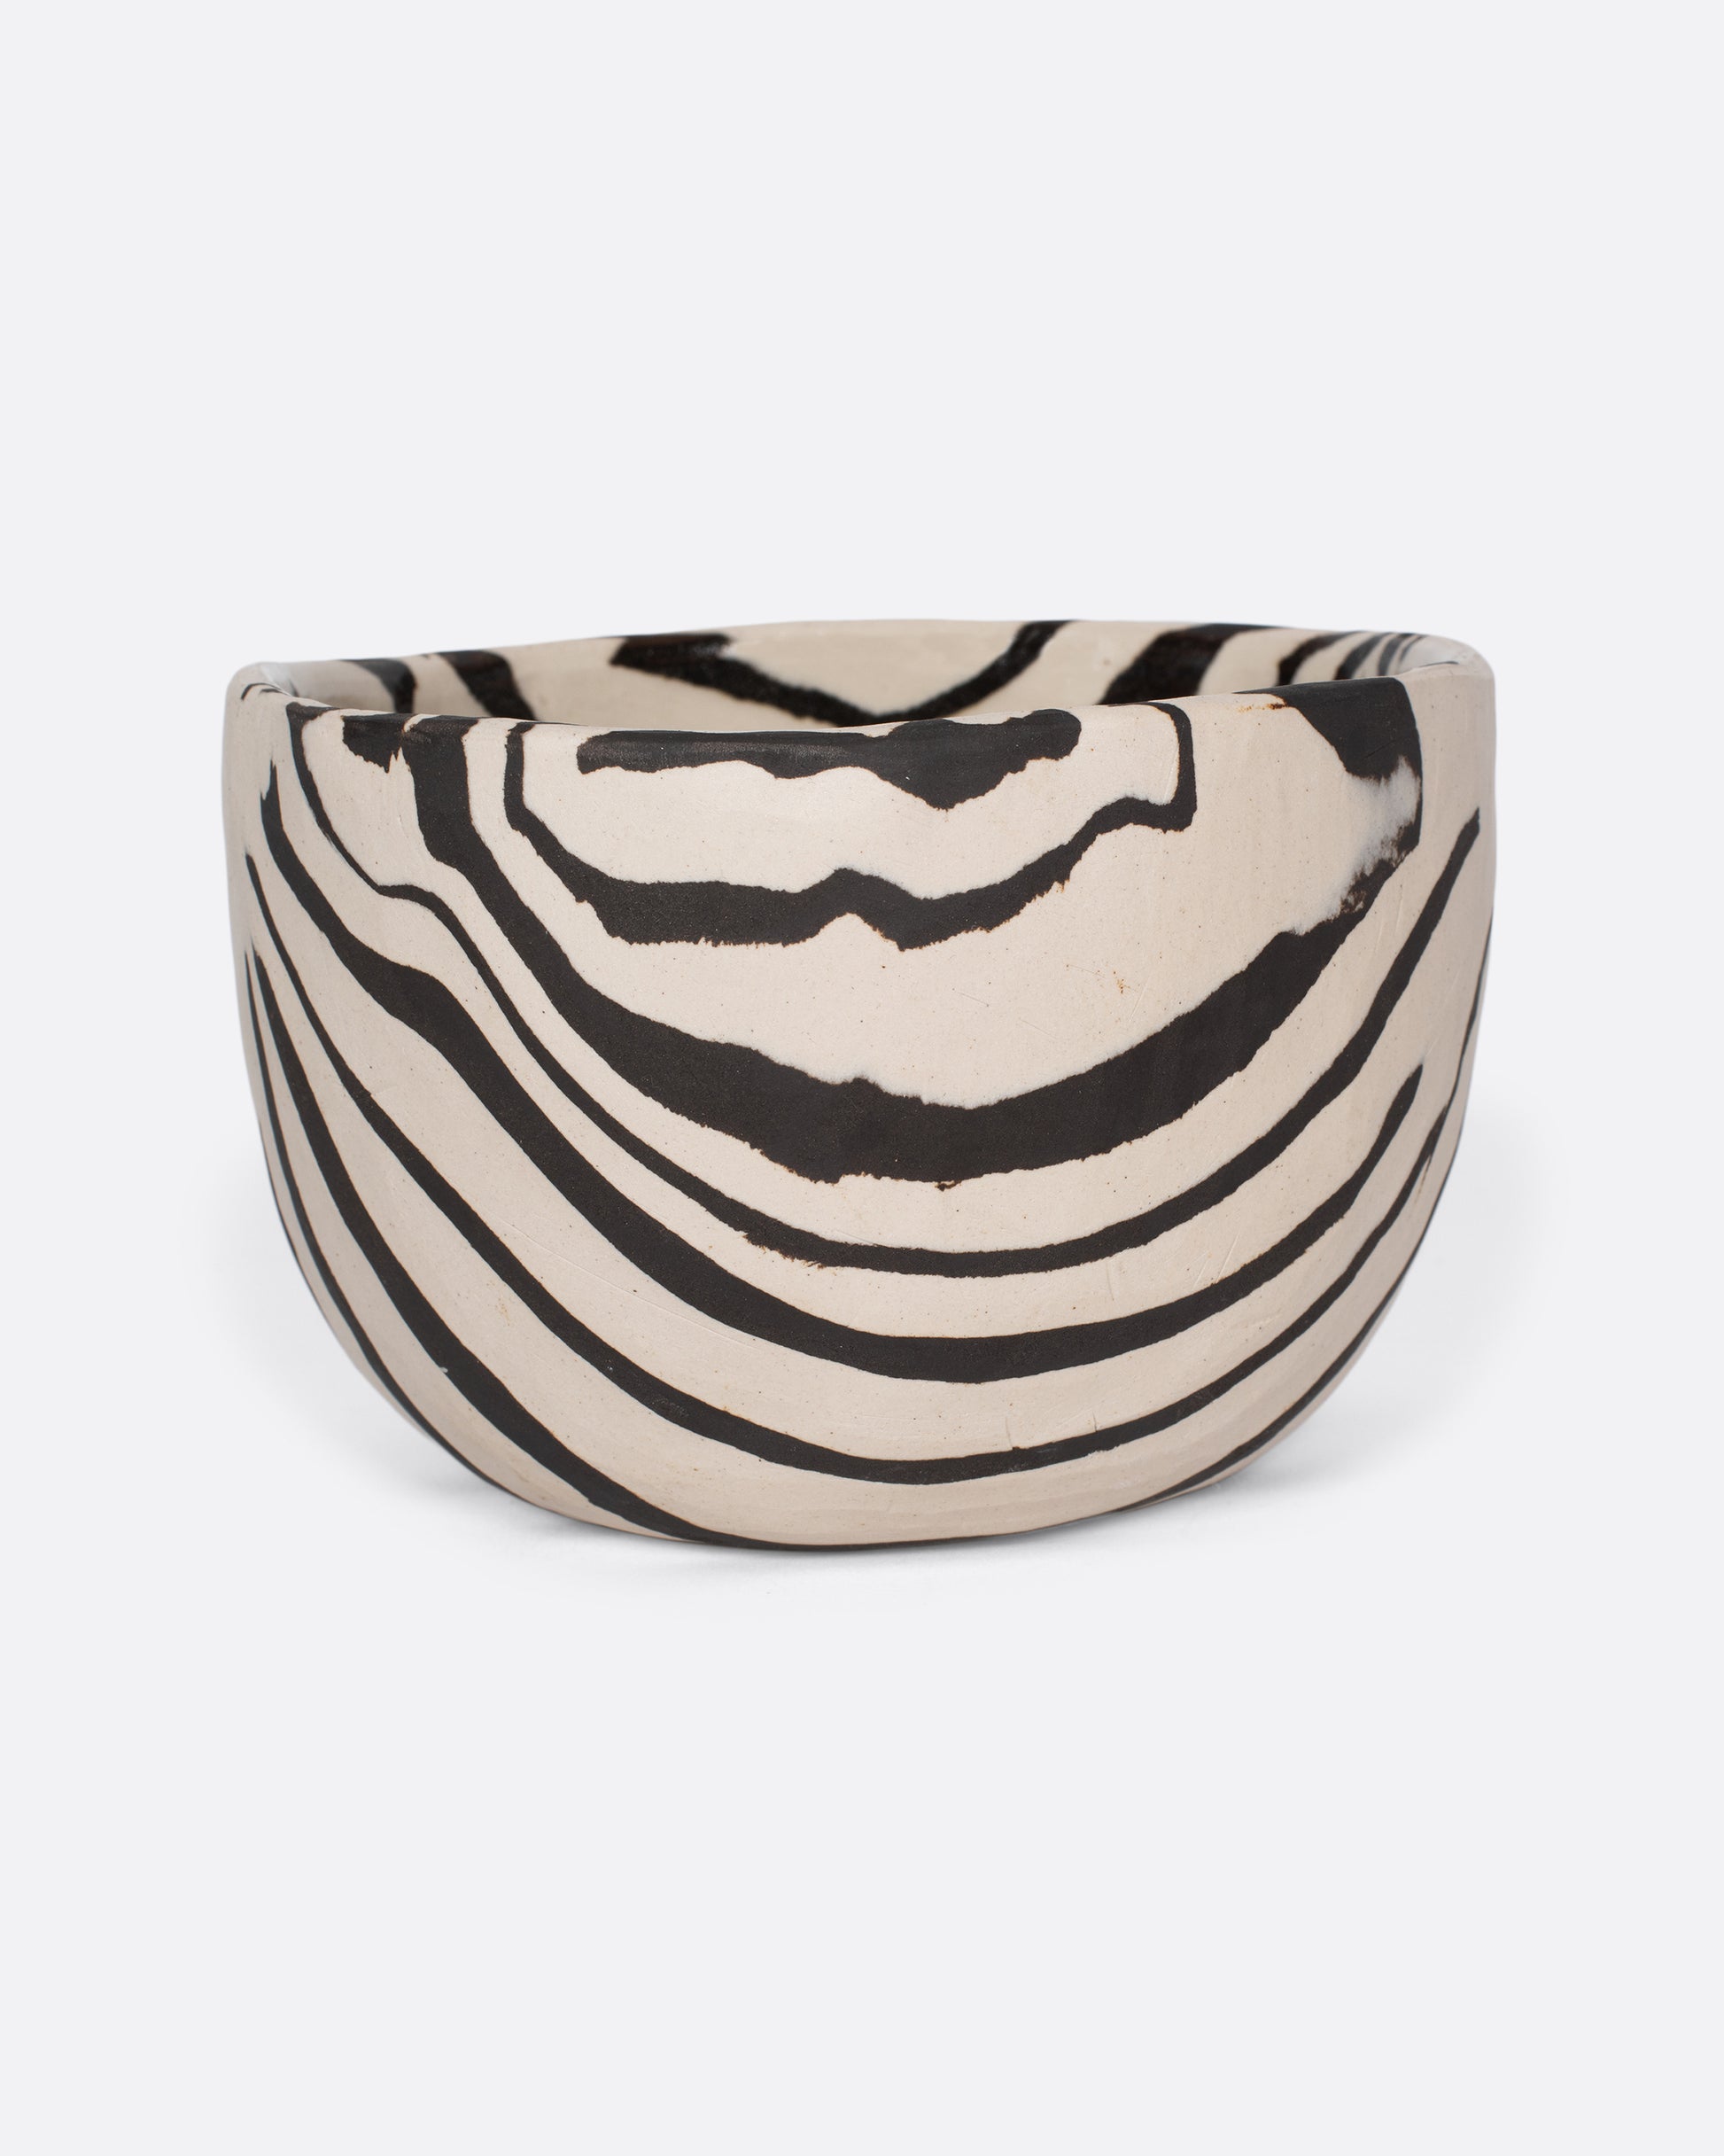 These small-batch ceramic bowls are made with a traditional Japanese Nerikomi technique that creates an intricate, marbled design by layering and compressing clay. Each bowl has a unique, zebra-striped design that feels other-worldly and timeless. Available in small, medium, and large sizes.